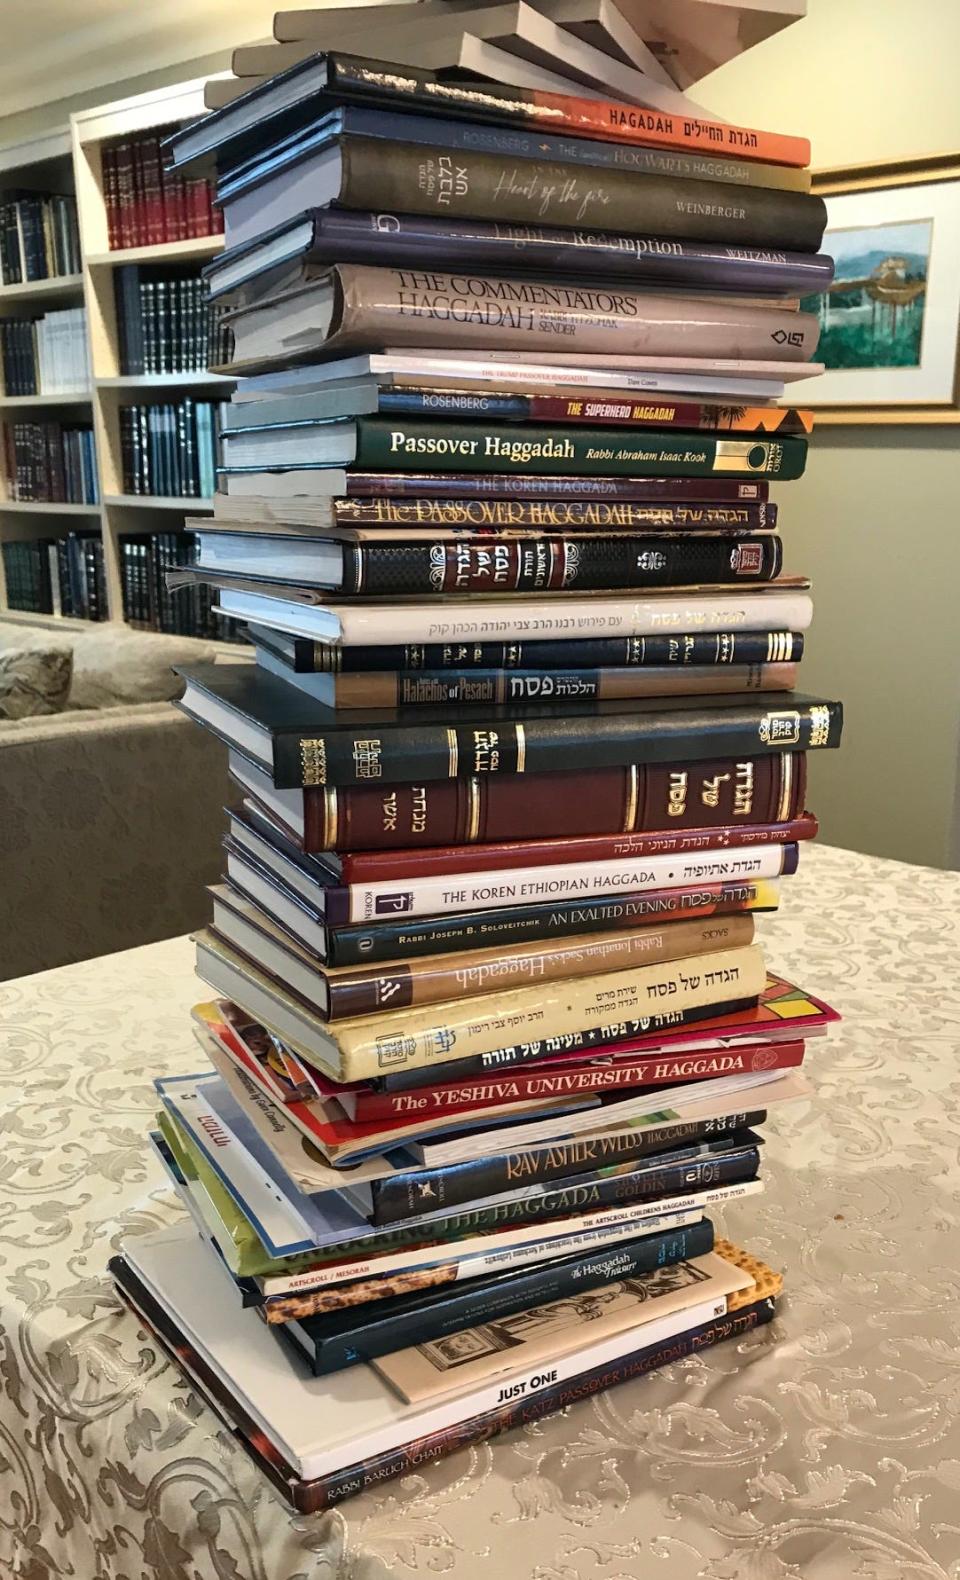 A collection of Haggadah for Passover Seders.